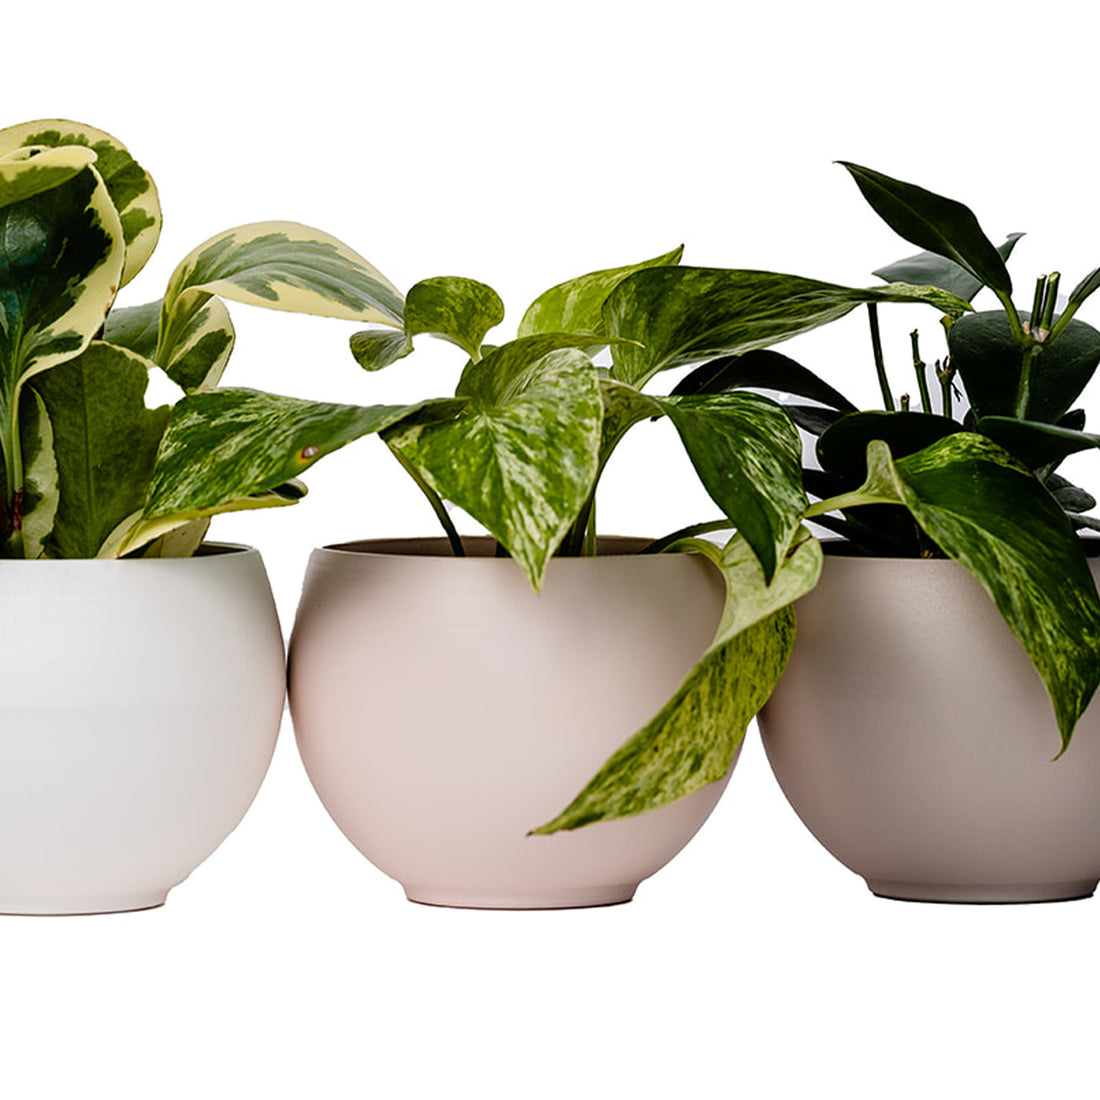 three braid & wood aluminum vessels styled with houseplants on white background